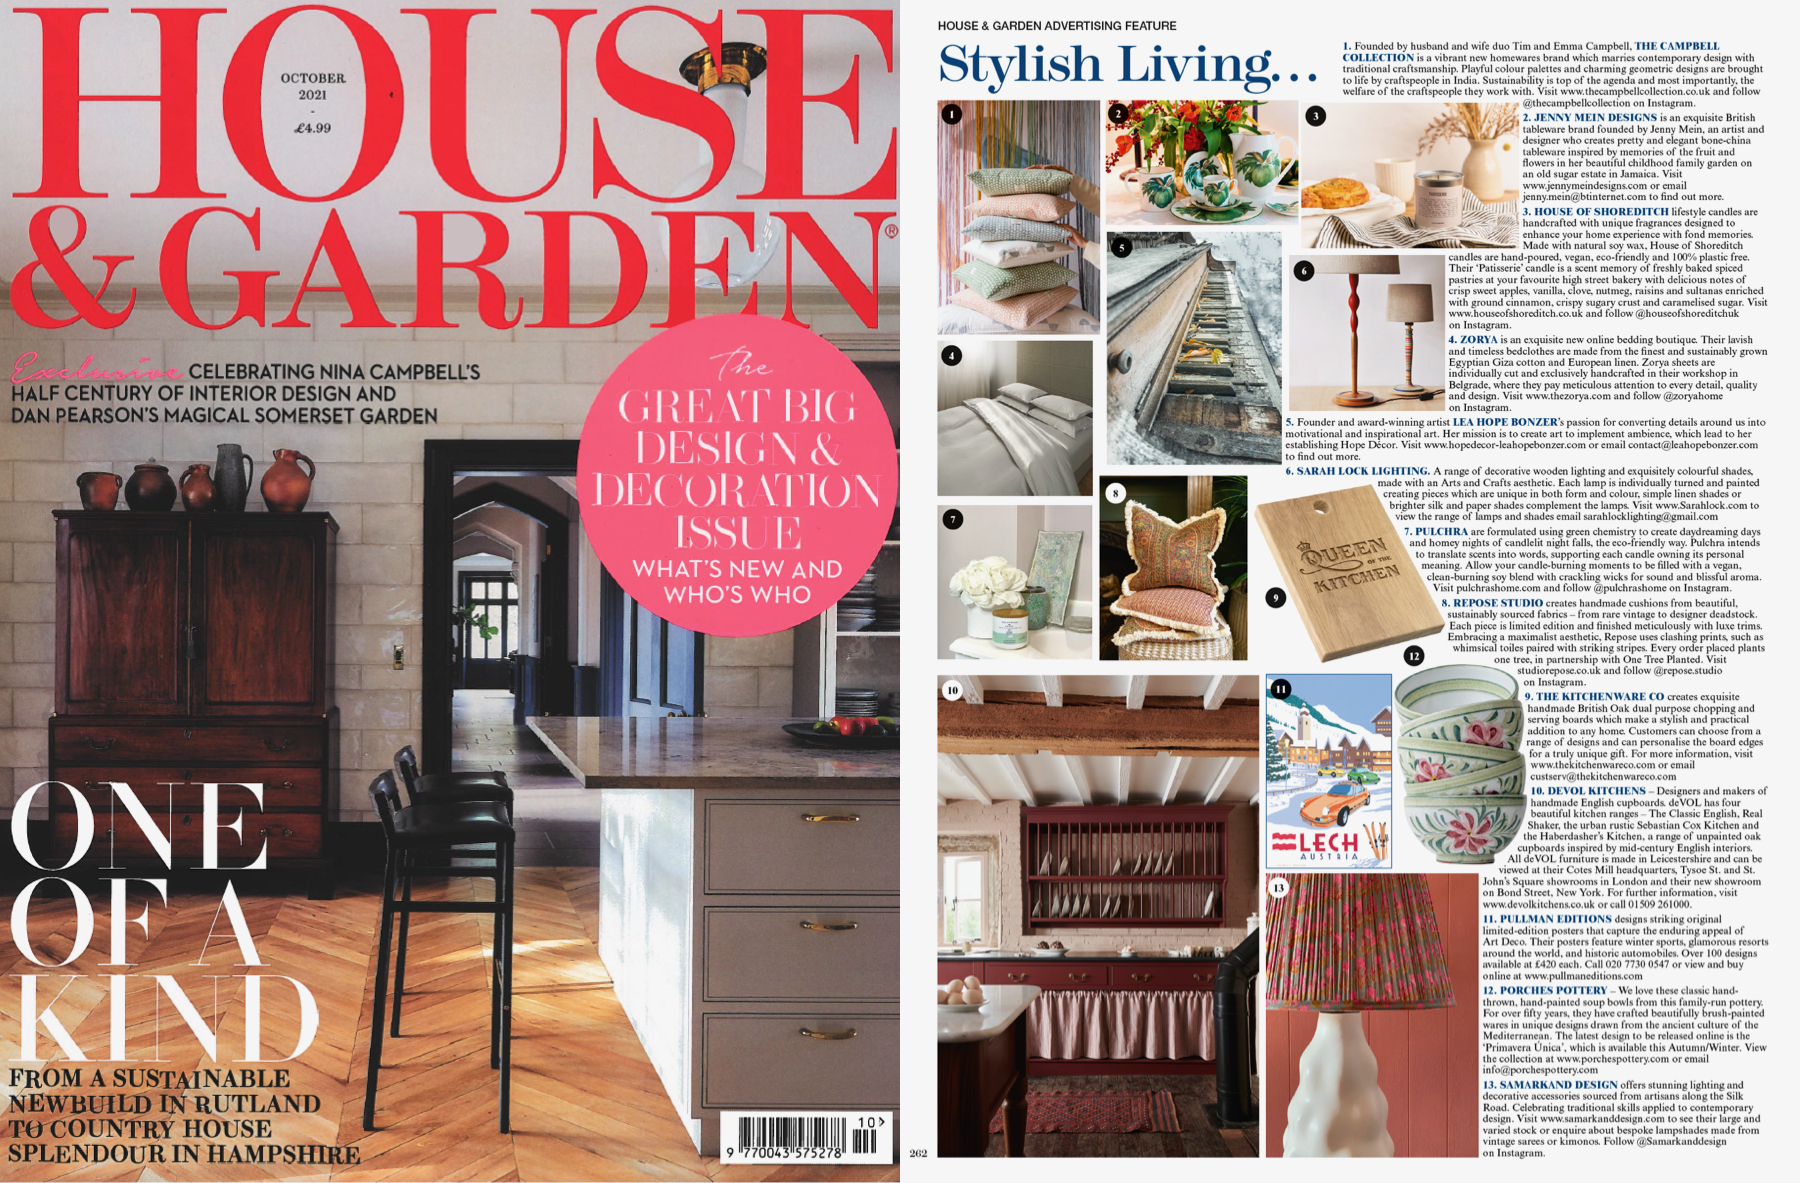 house and garden magazine pctober issue